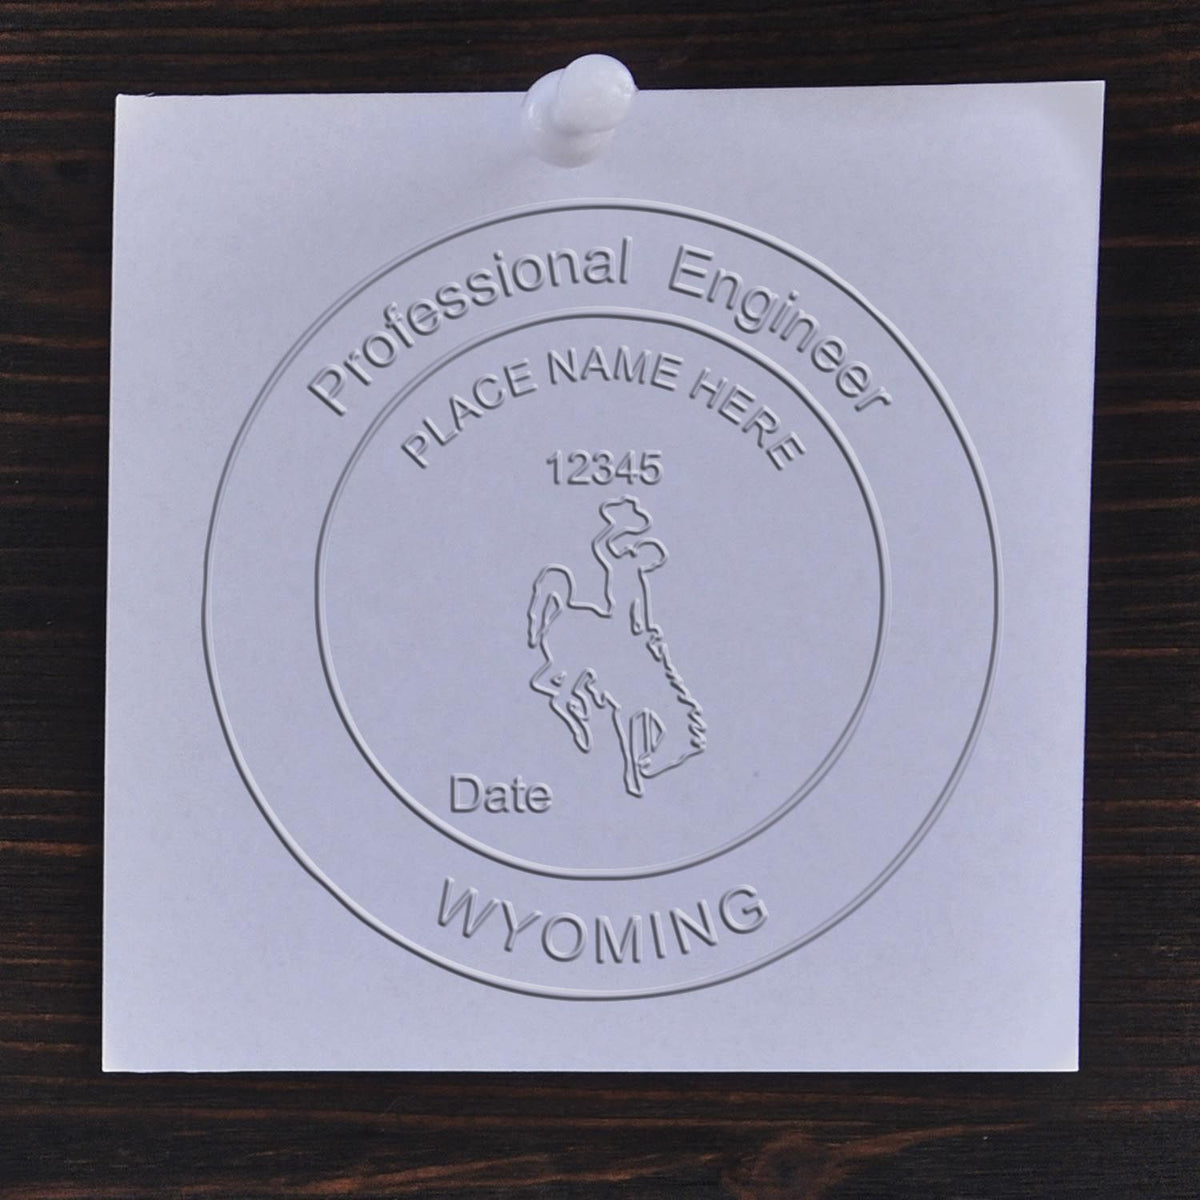 An alternative view of the Heavy Duty Cast Iron Wyoming Engineer Seal Embosser stamped on a sheet of paper showing the image in use